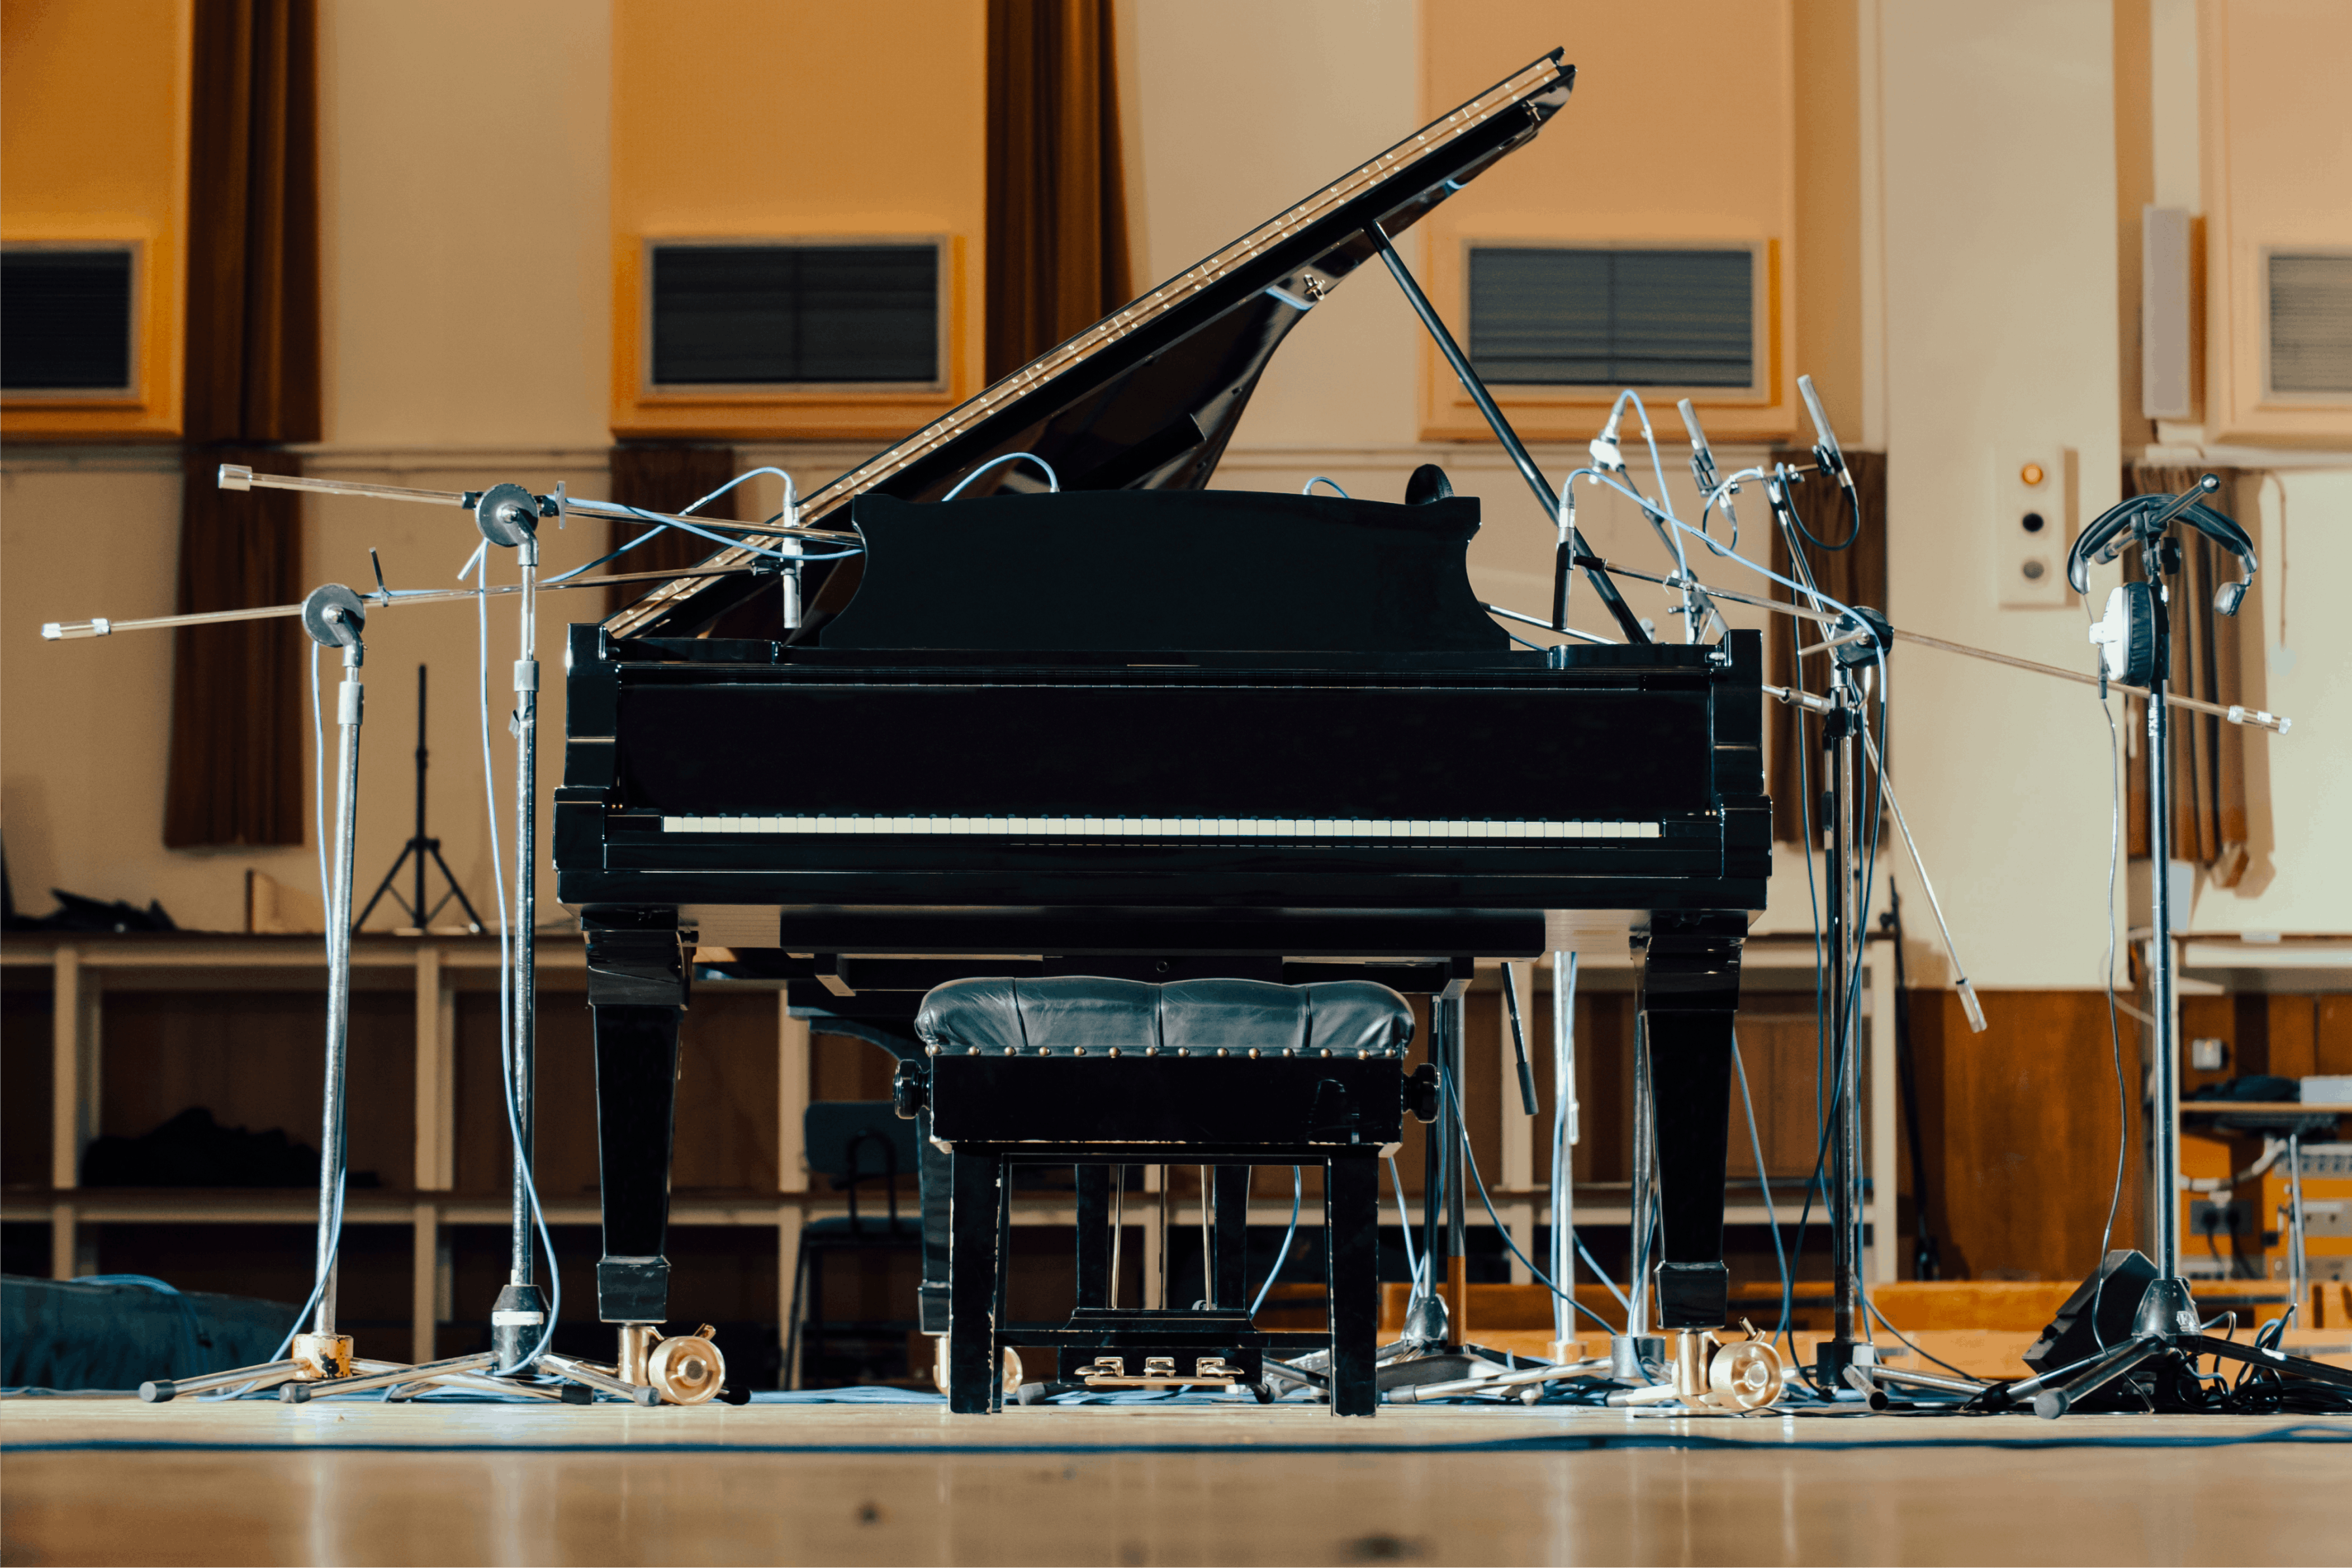 The BBC Piano in Maida Vale Studios, surrounded by microphones